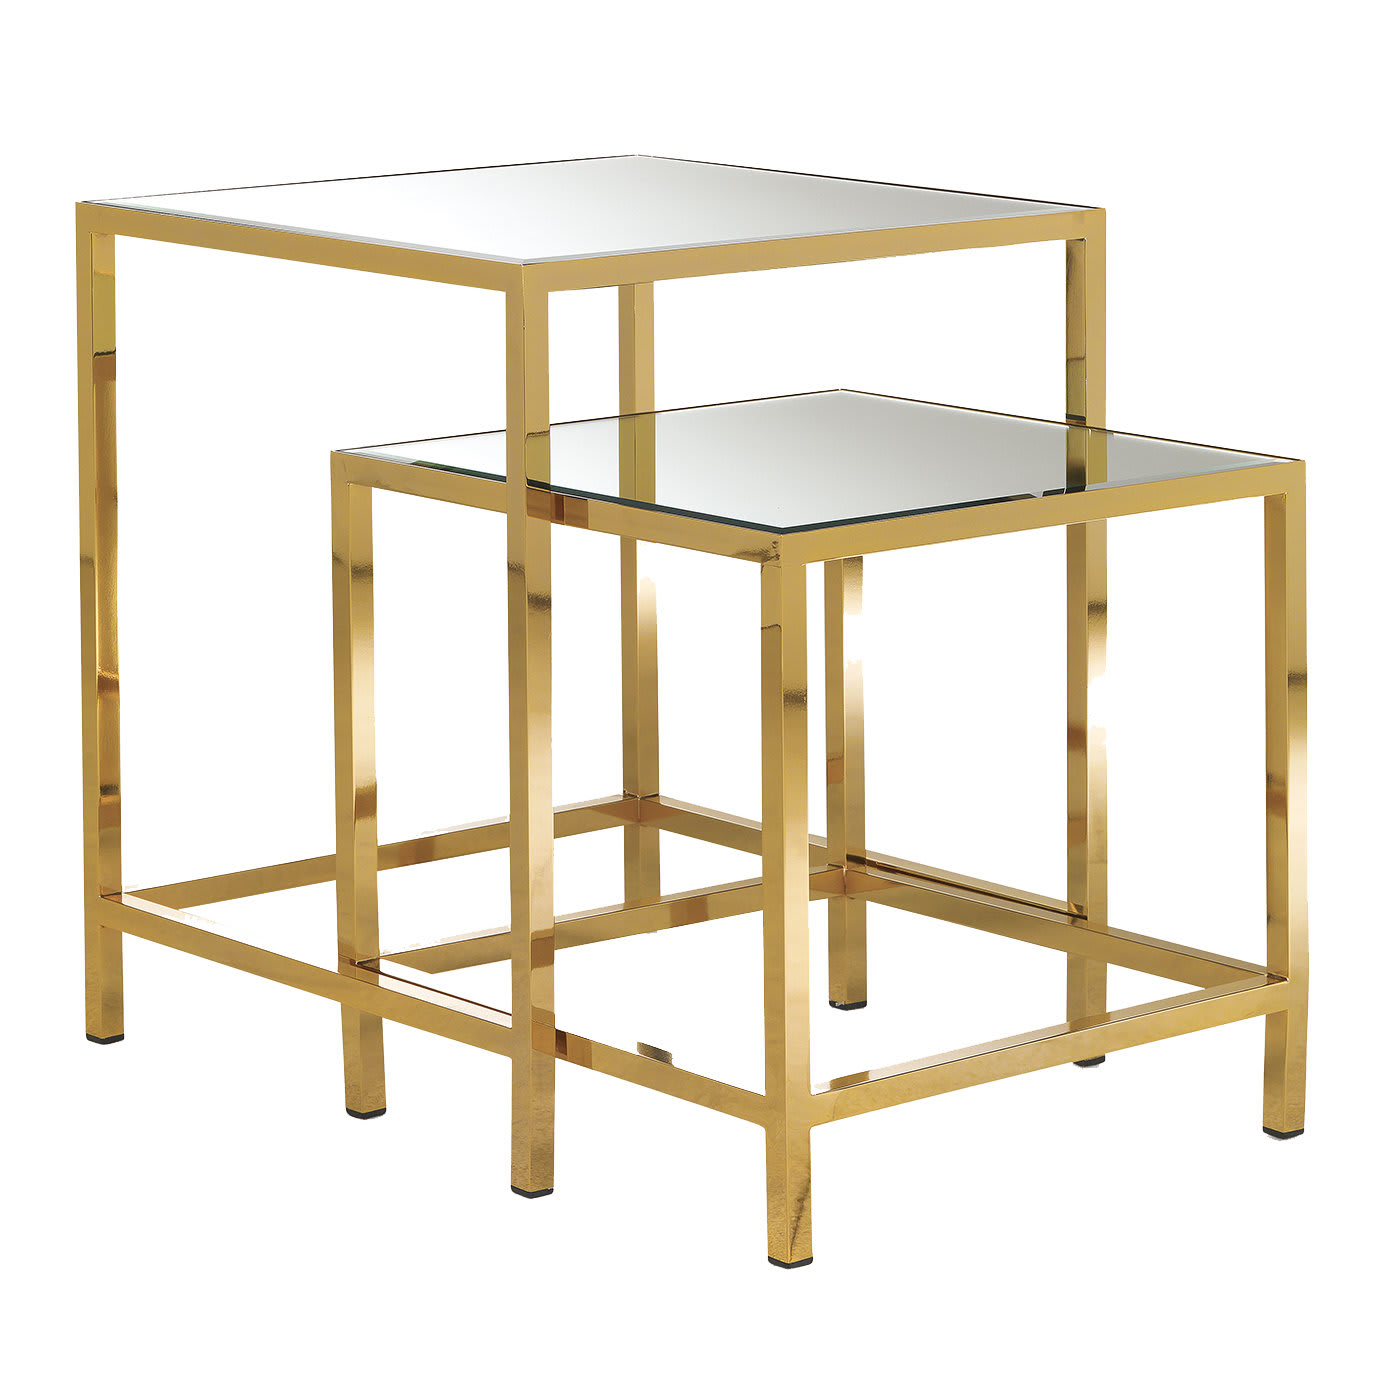 Set of 2 Nesting Tables with Mirror top - Zanaboni